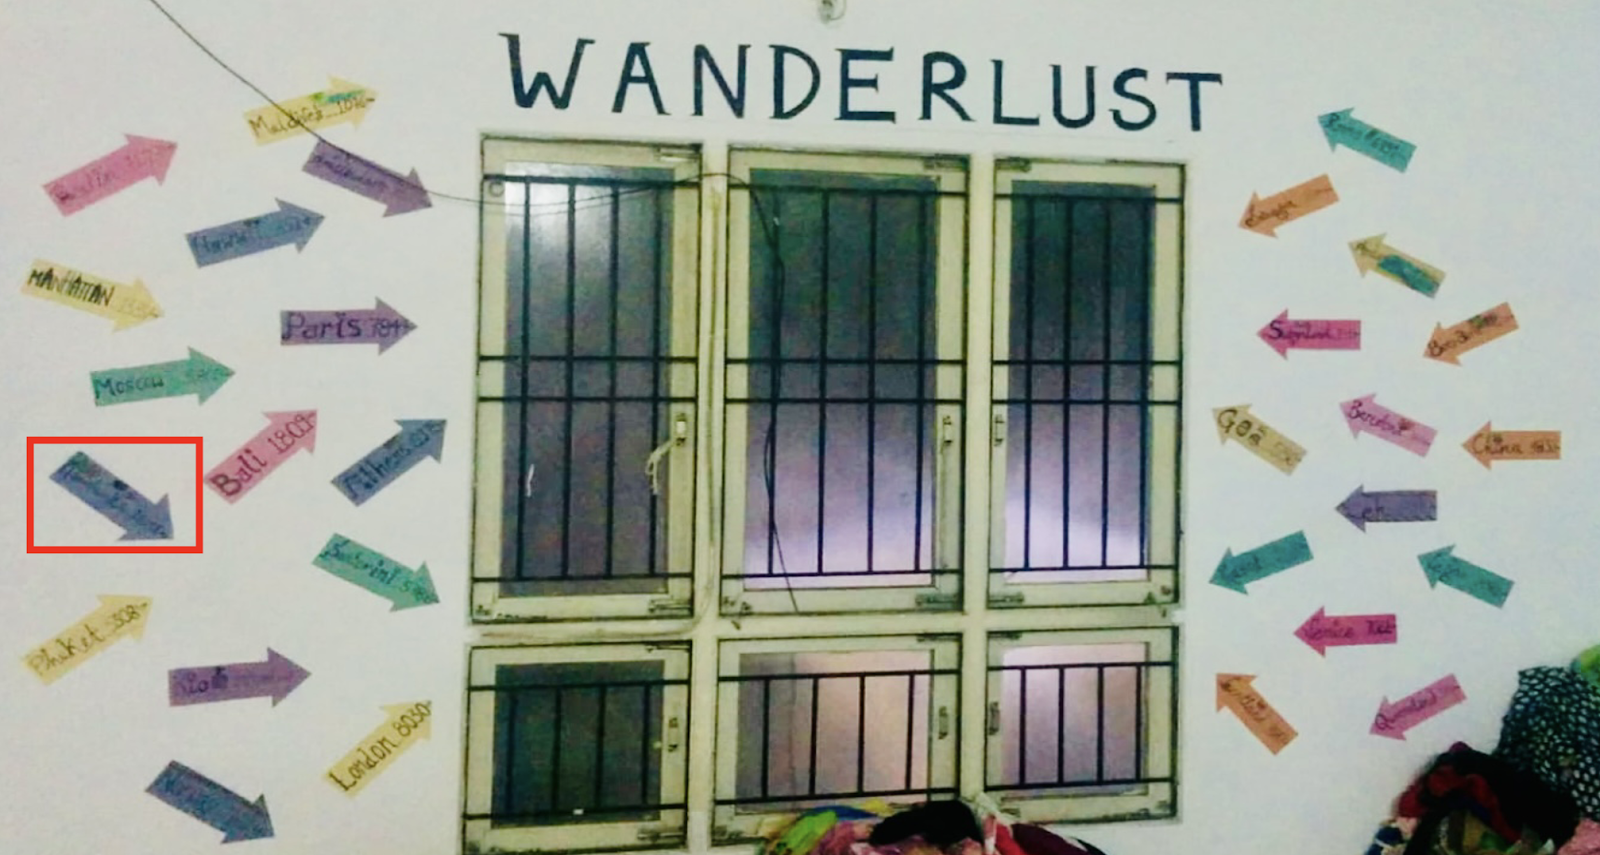 A wall of colorful arrows pointing towards the windows under the heading "Wanderlust." One blue arrow is highlighted.